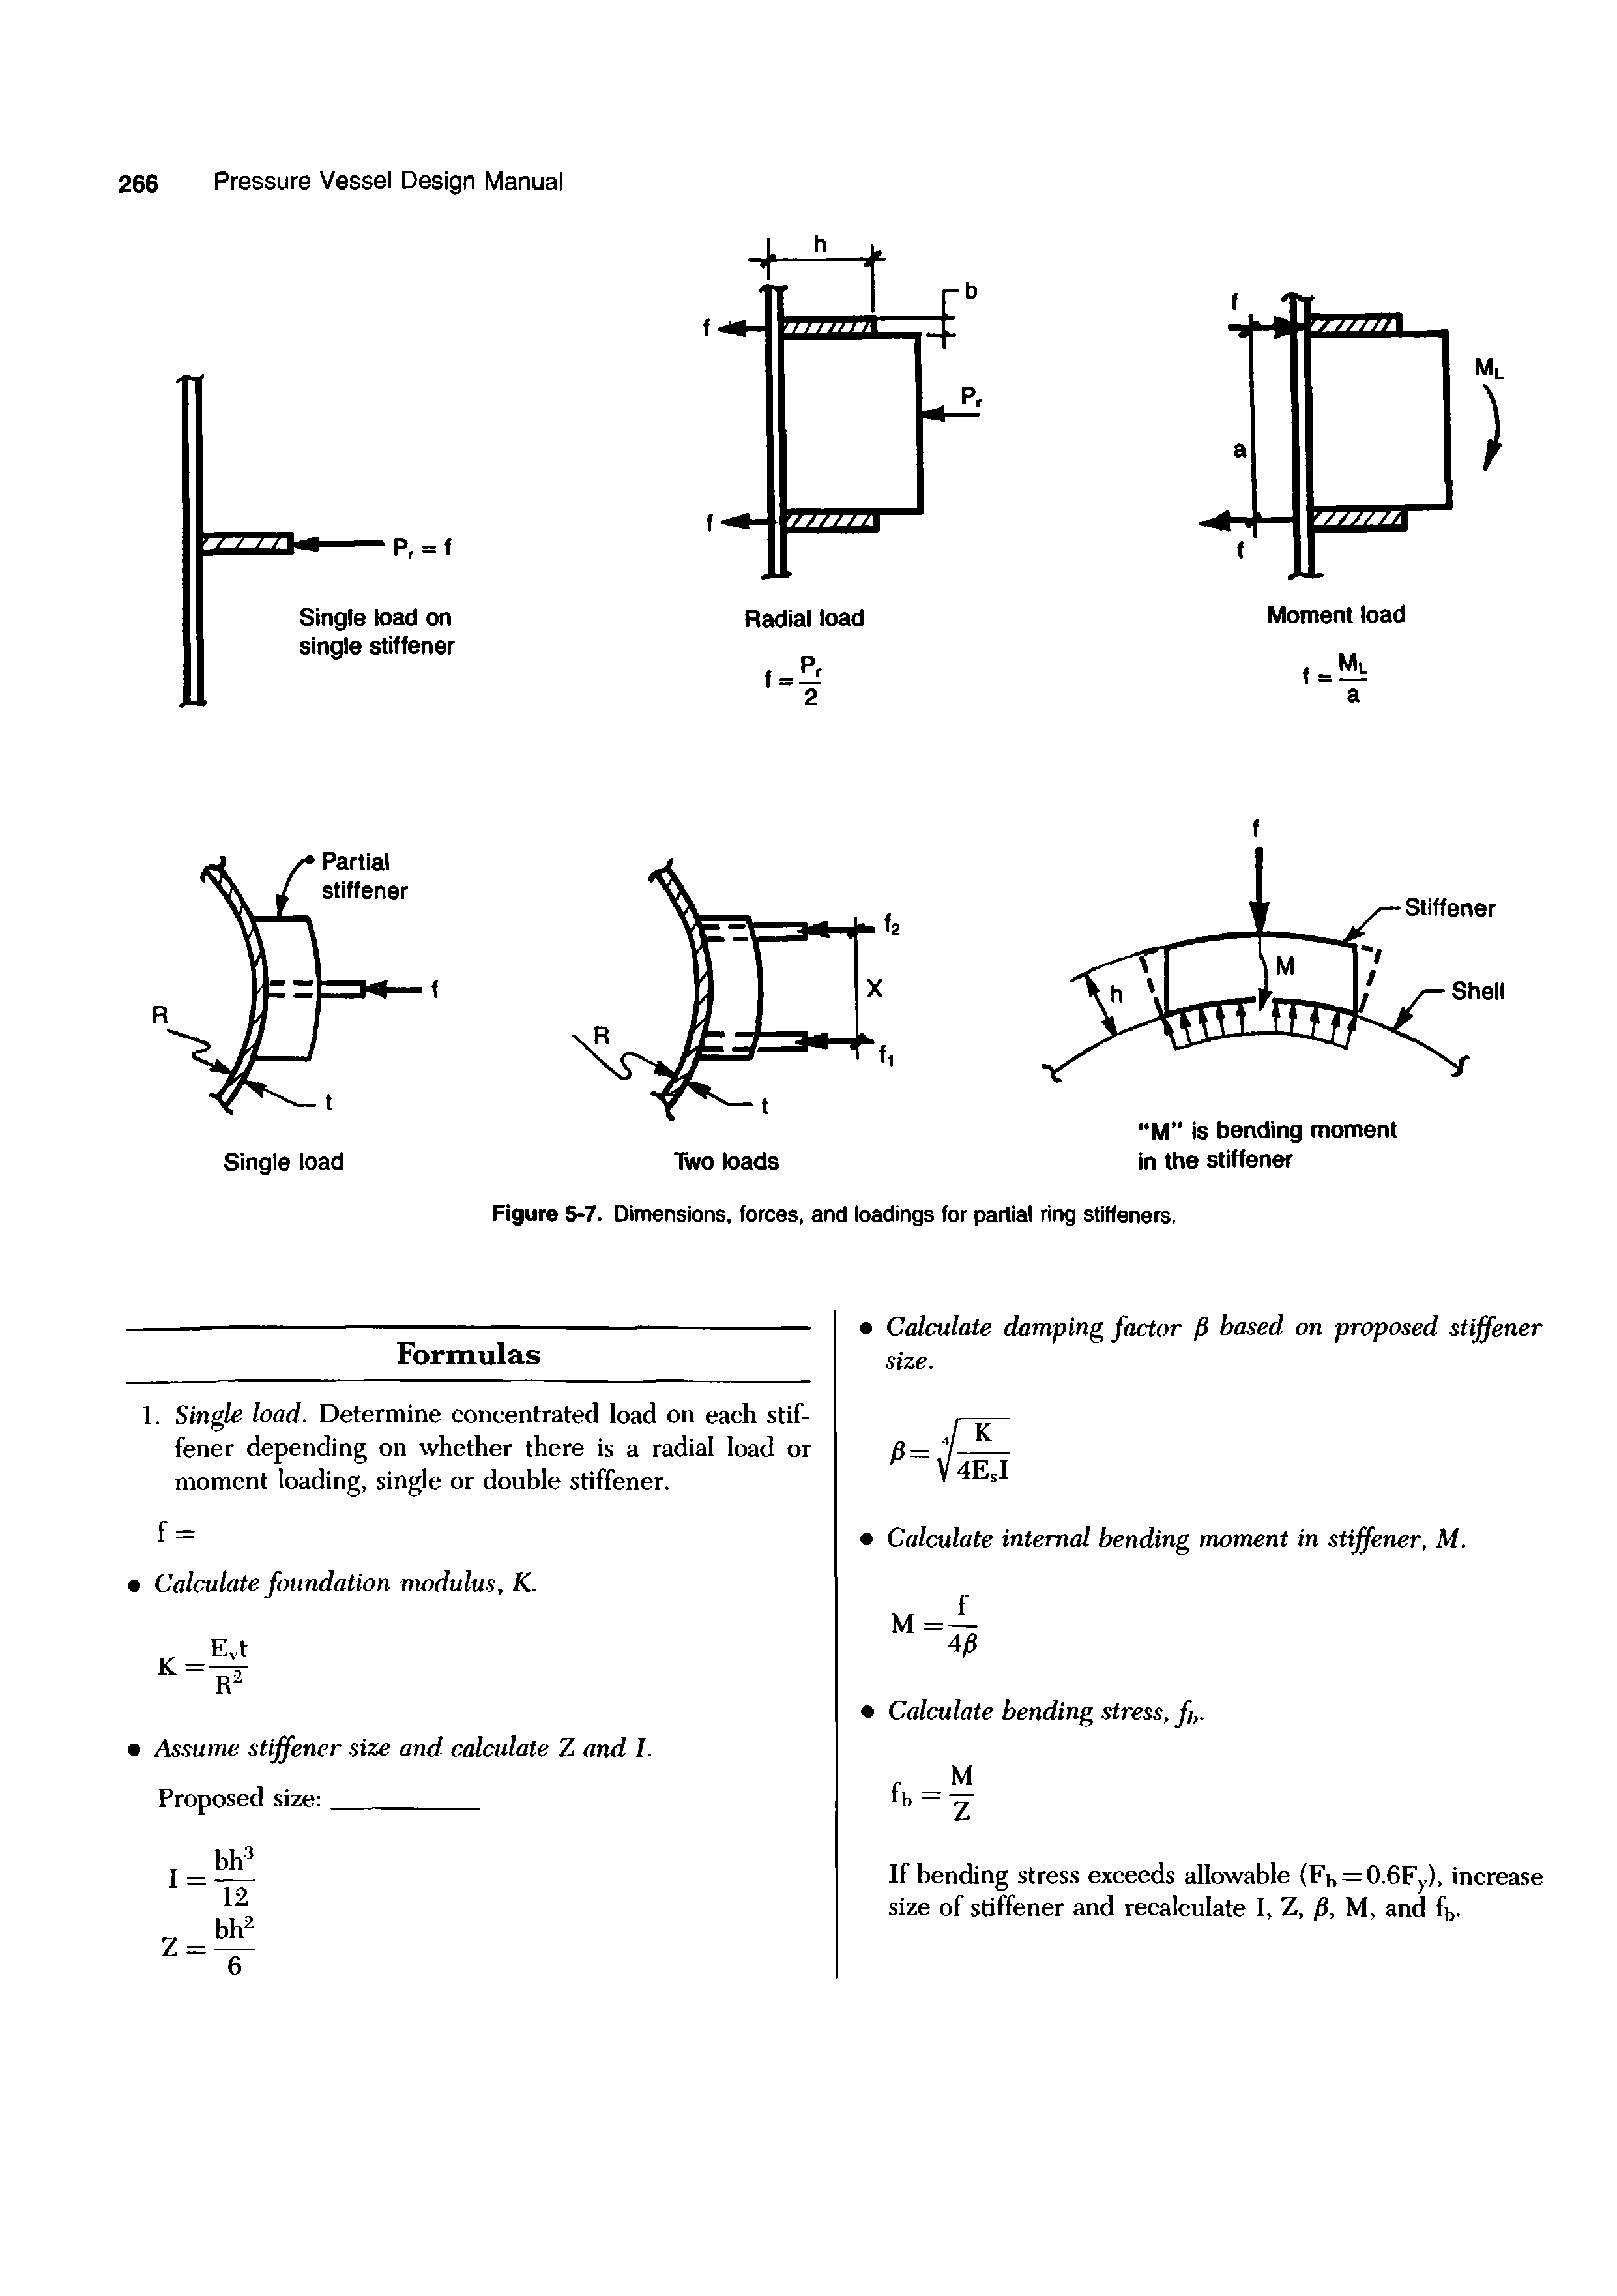 Figure 5-7. Dimensions, forces, and loadings for partial ring stiffeners.